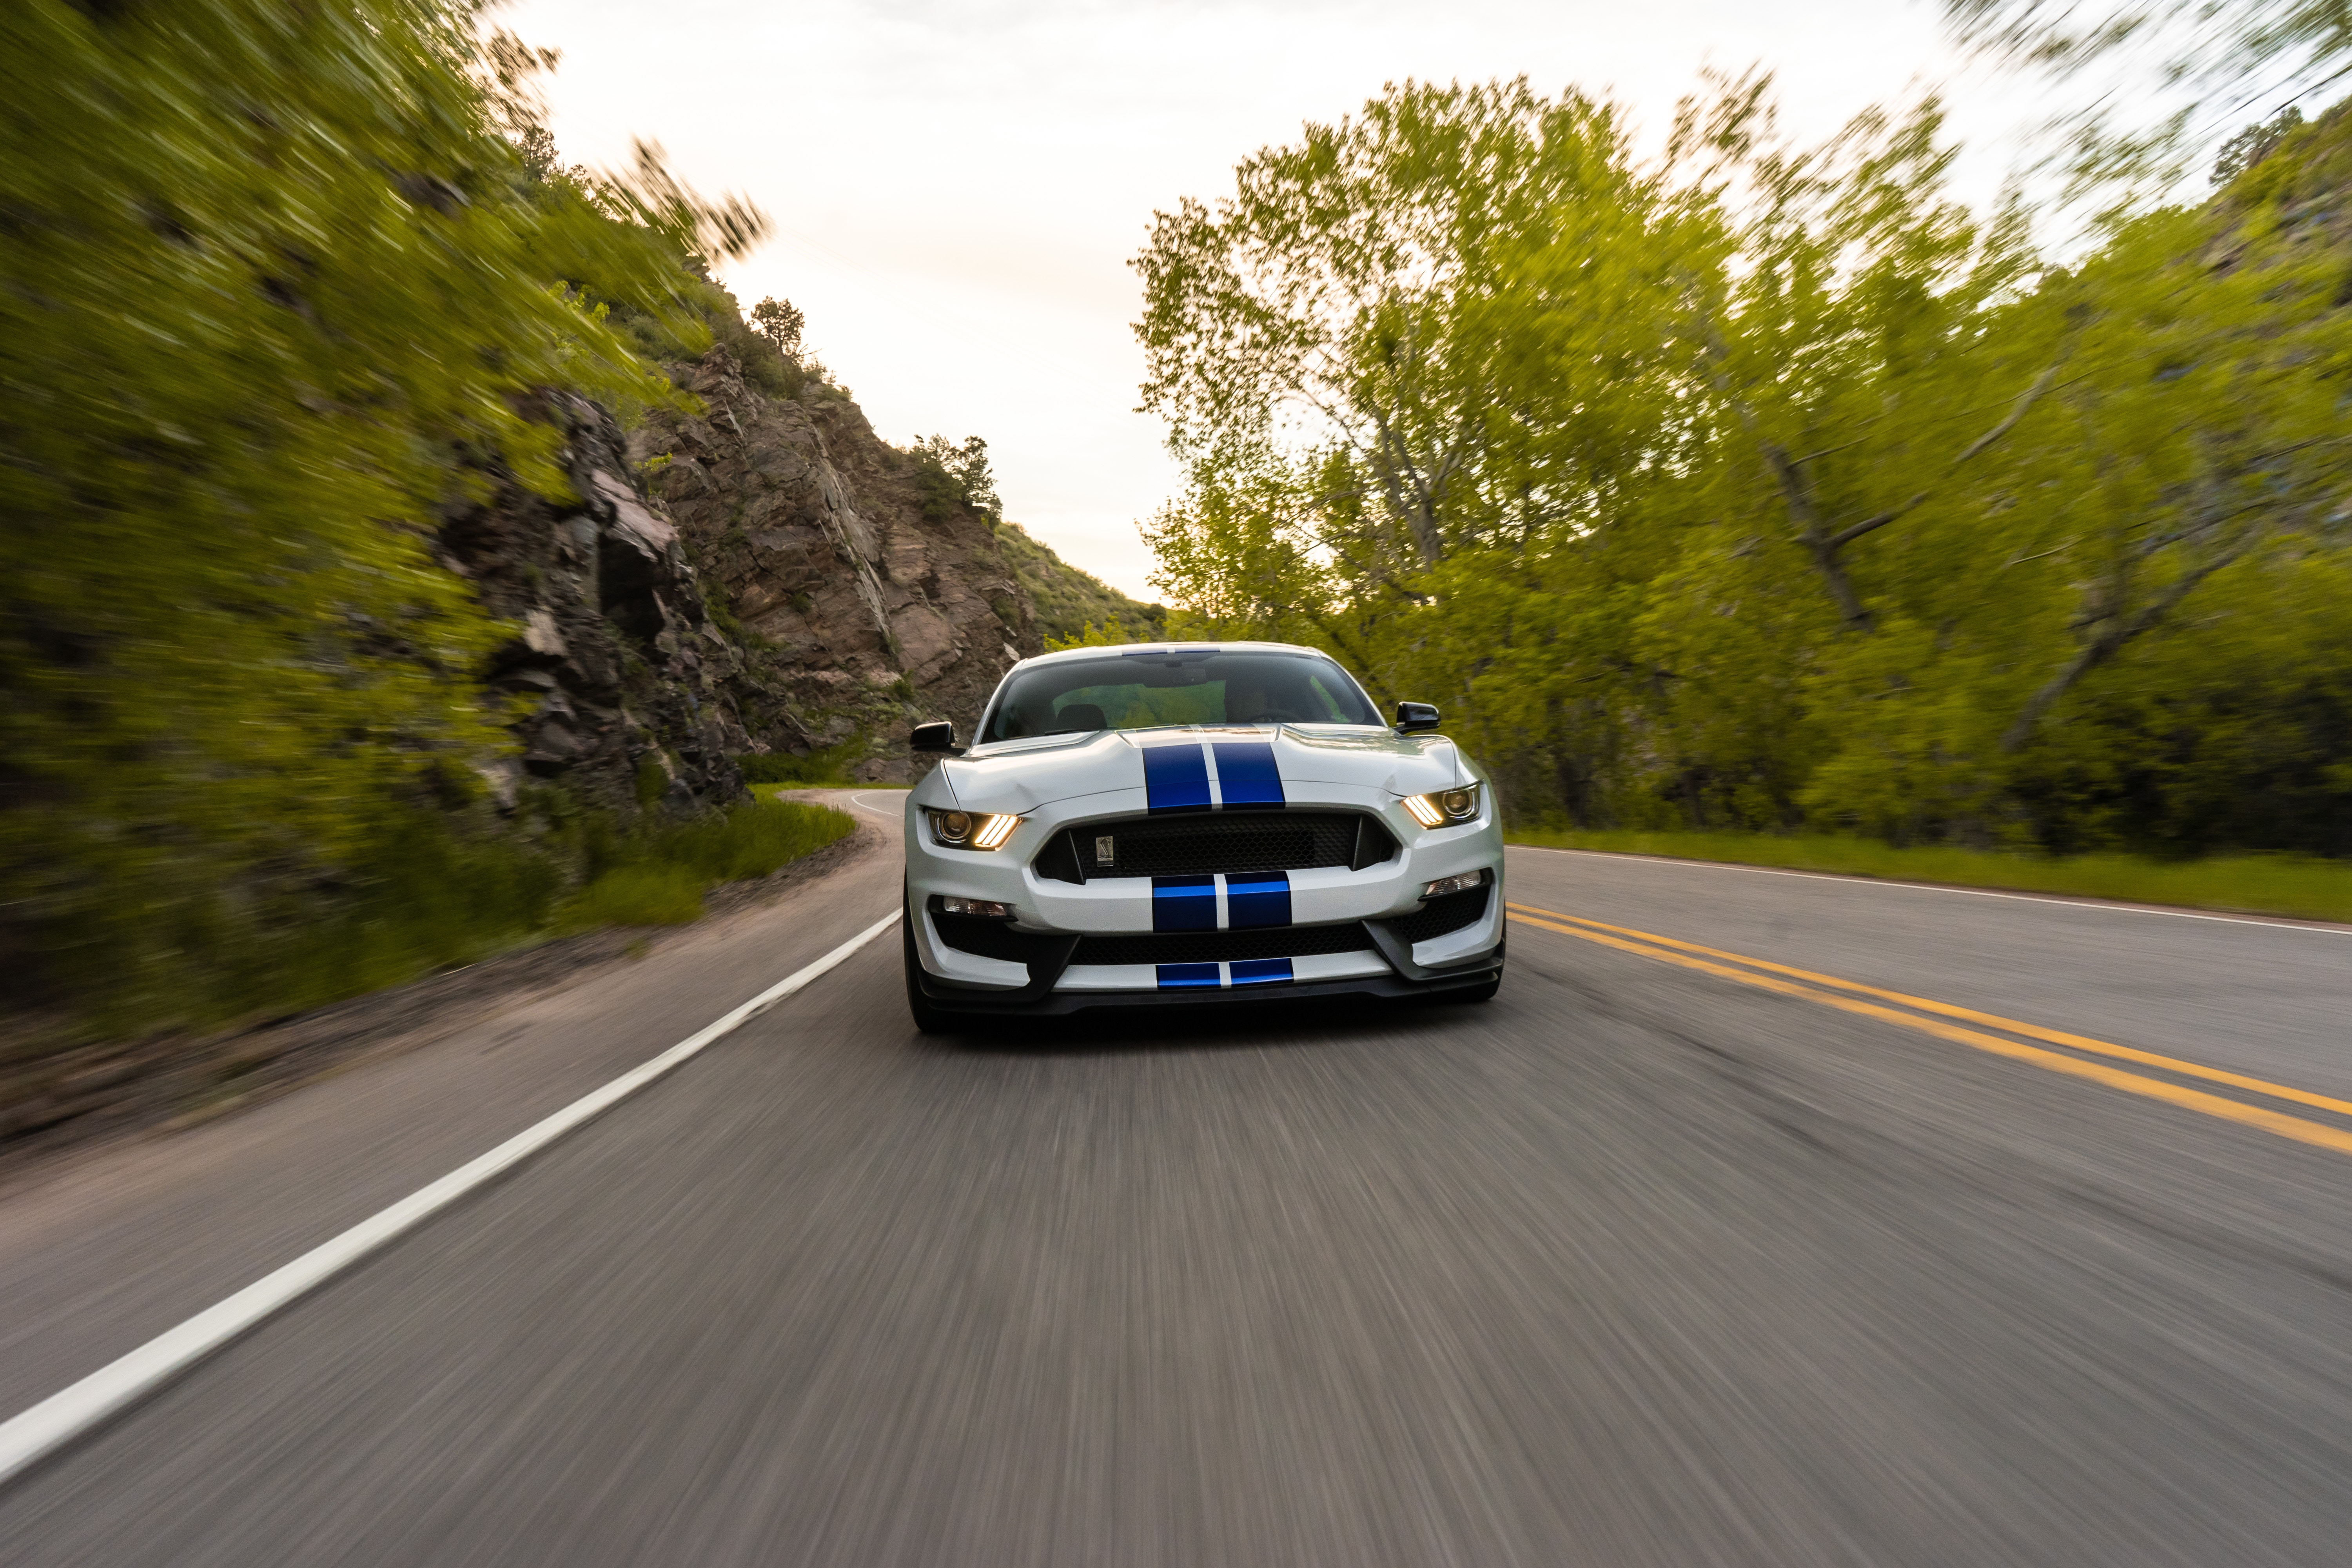 cars, sports car, car, speed, ford mustang gt350, sports, ford, road, machine images